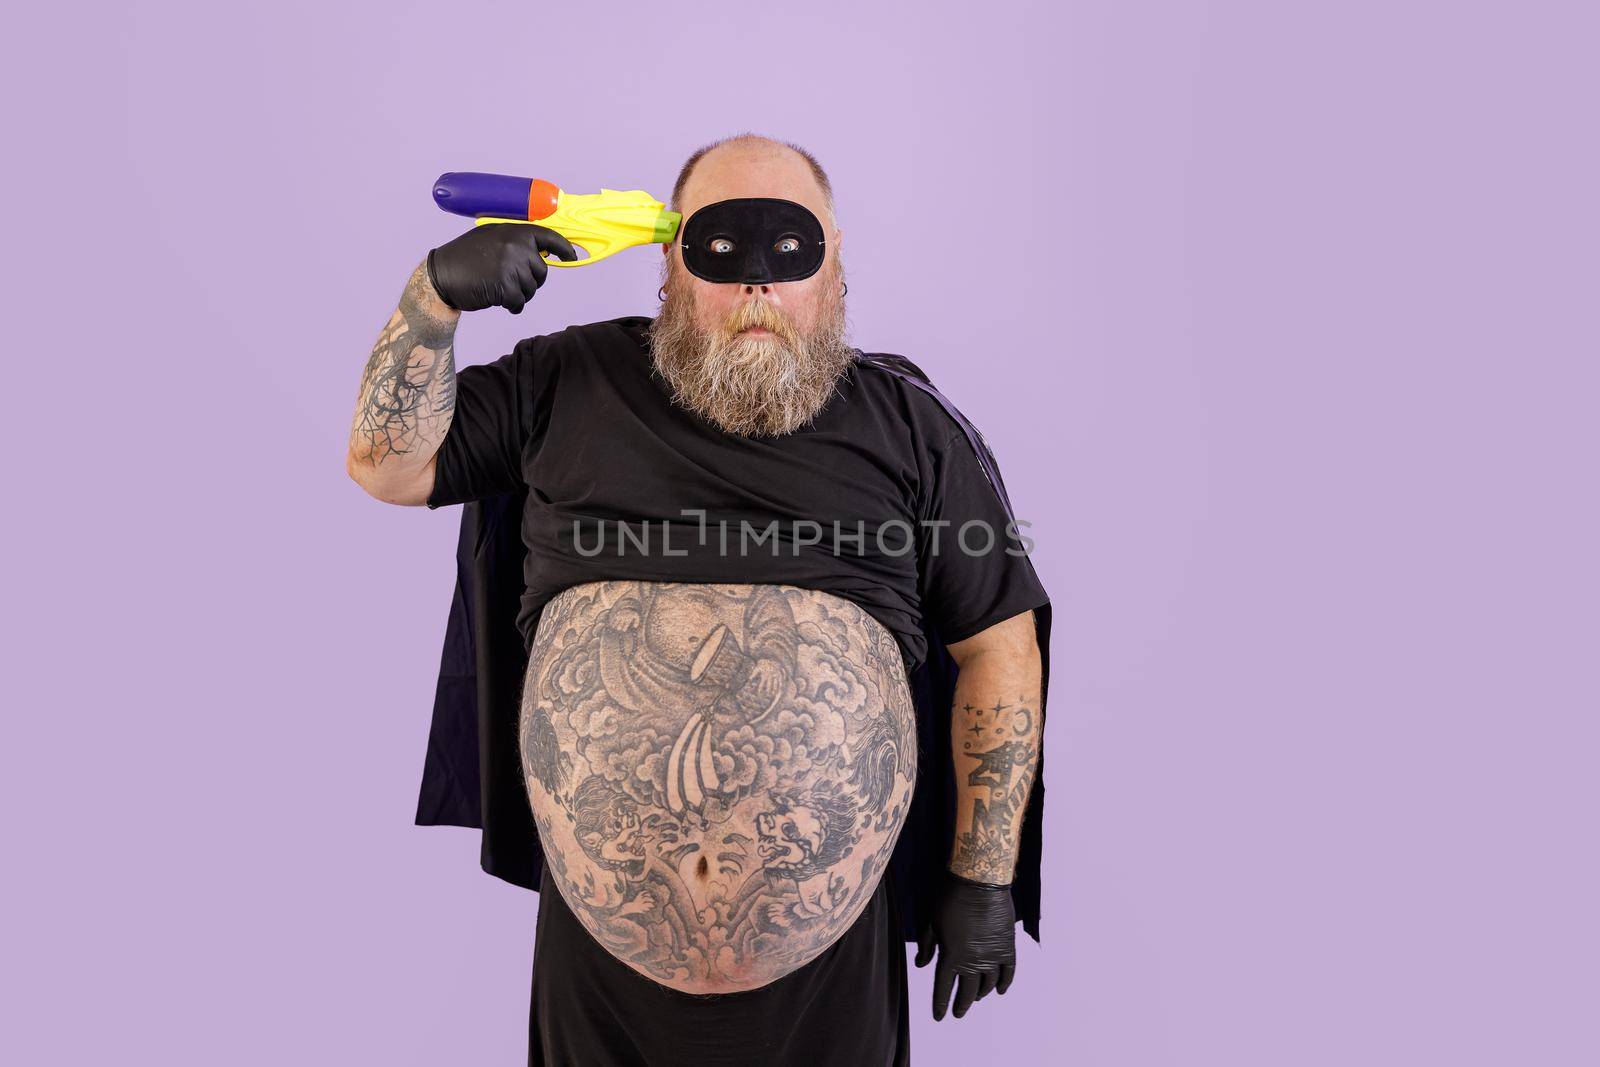 Funny obese man in hero costume holds toy blaster to temple on purple background by Yaroslav_astakhov